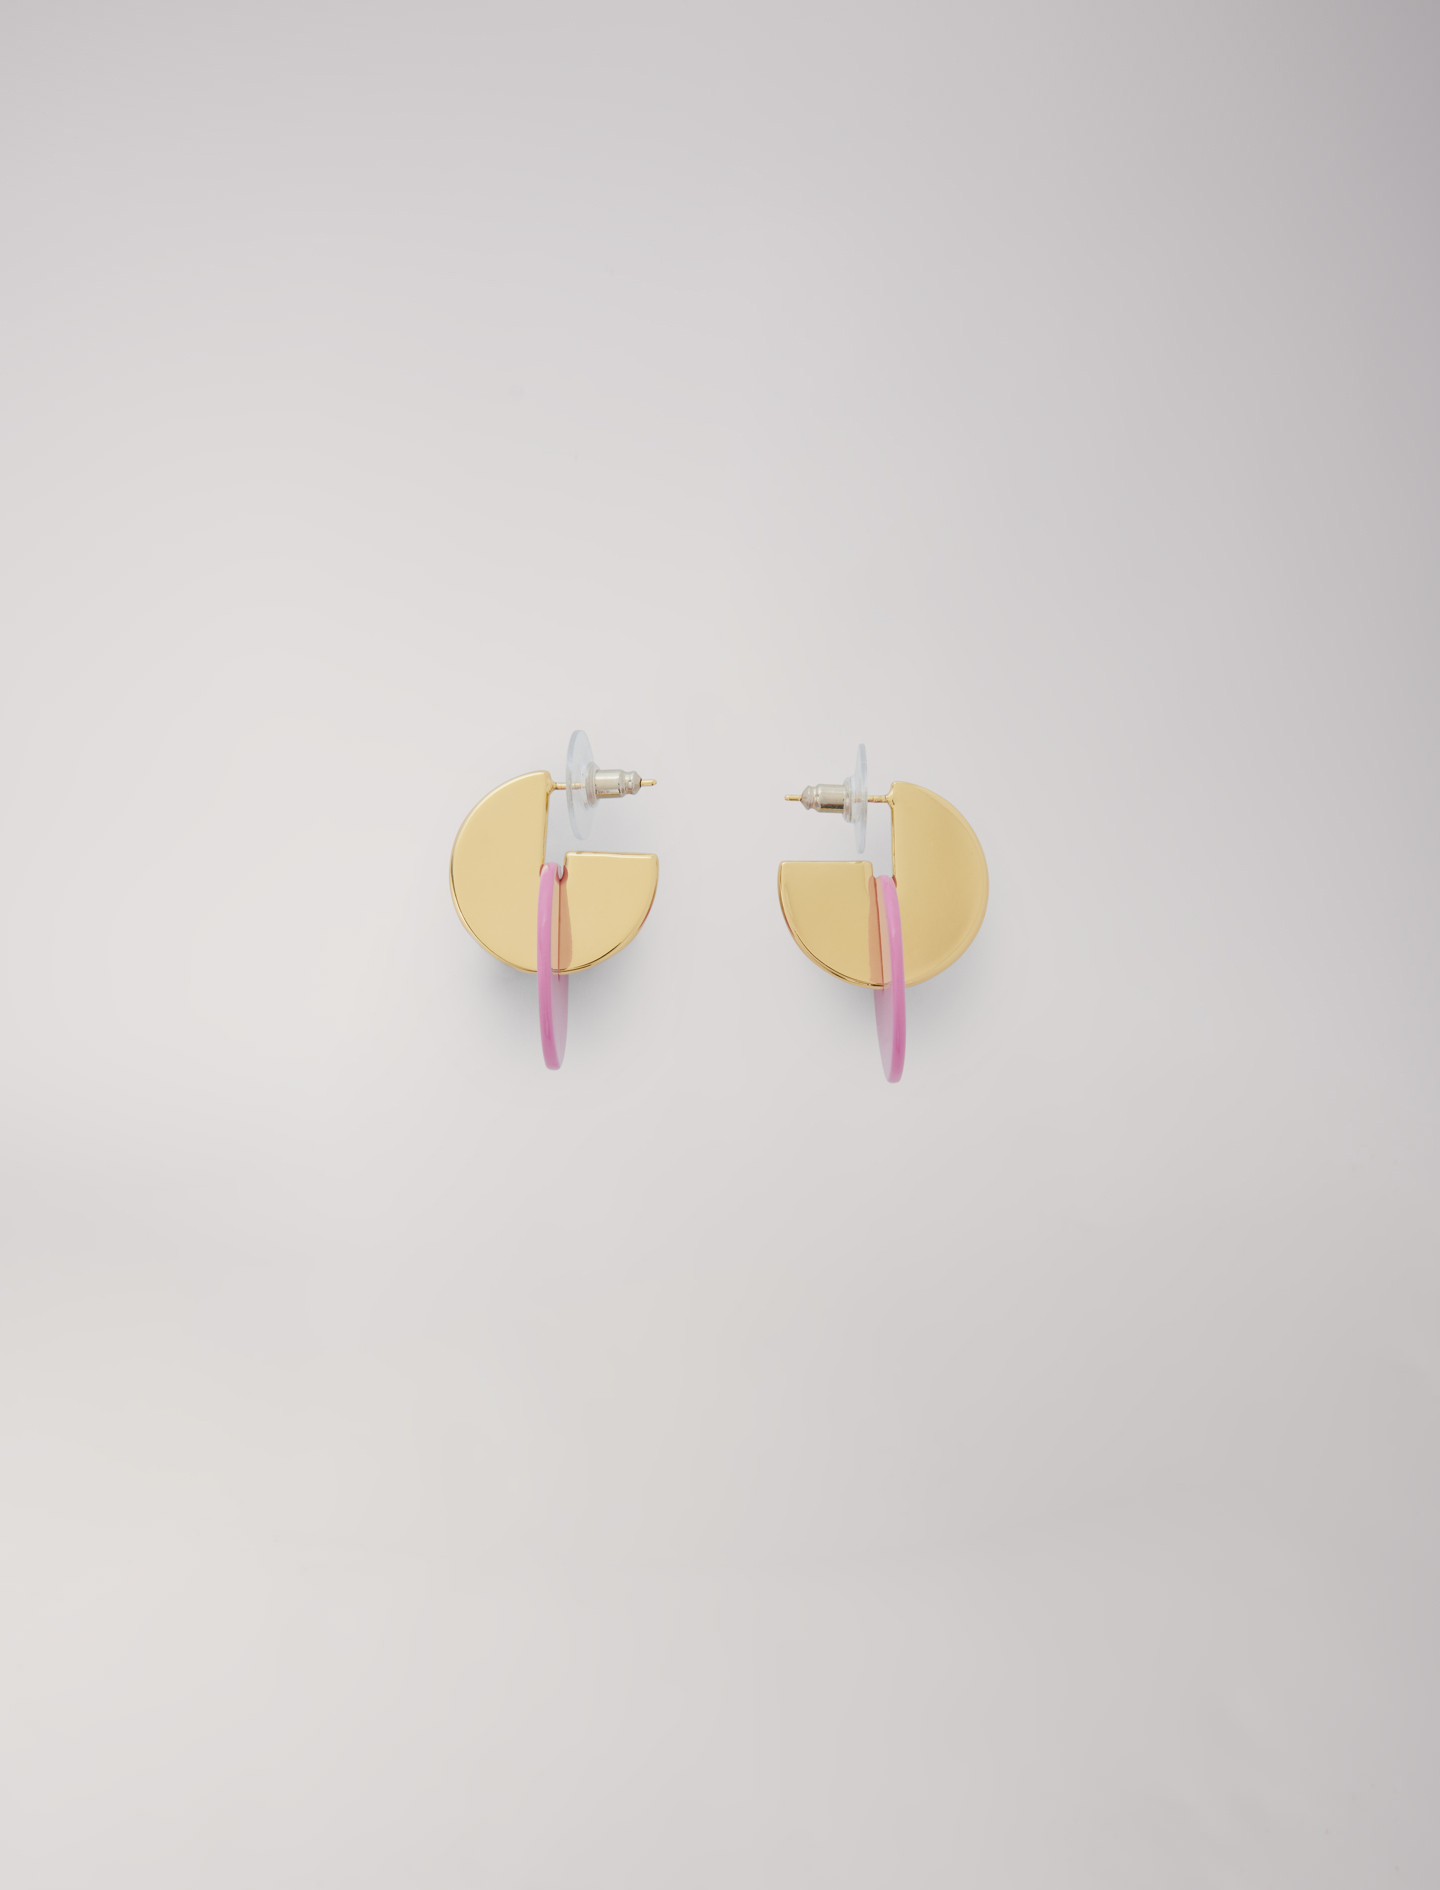 Woman's brass, Enameled earrings for Spring/Summer, size Woman-Jewelry-OS (ONE SIZE), in color Gold / Yellow